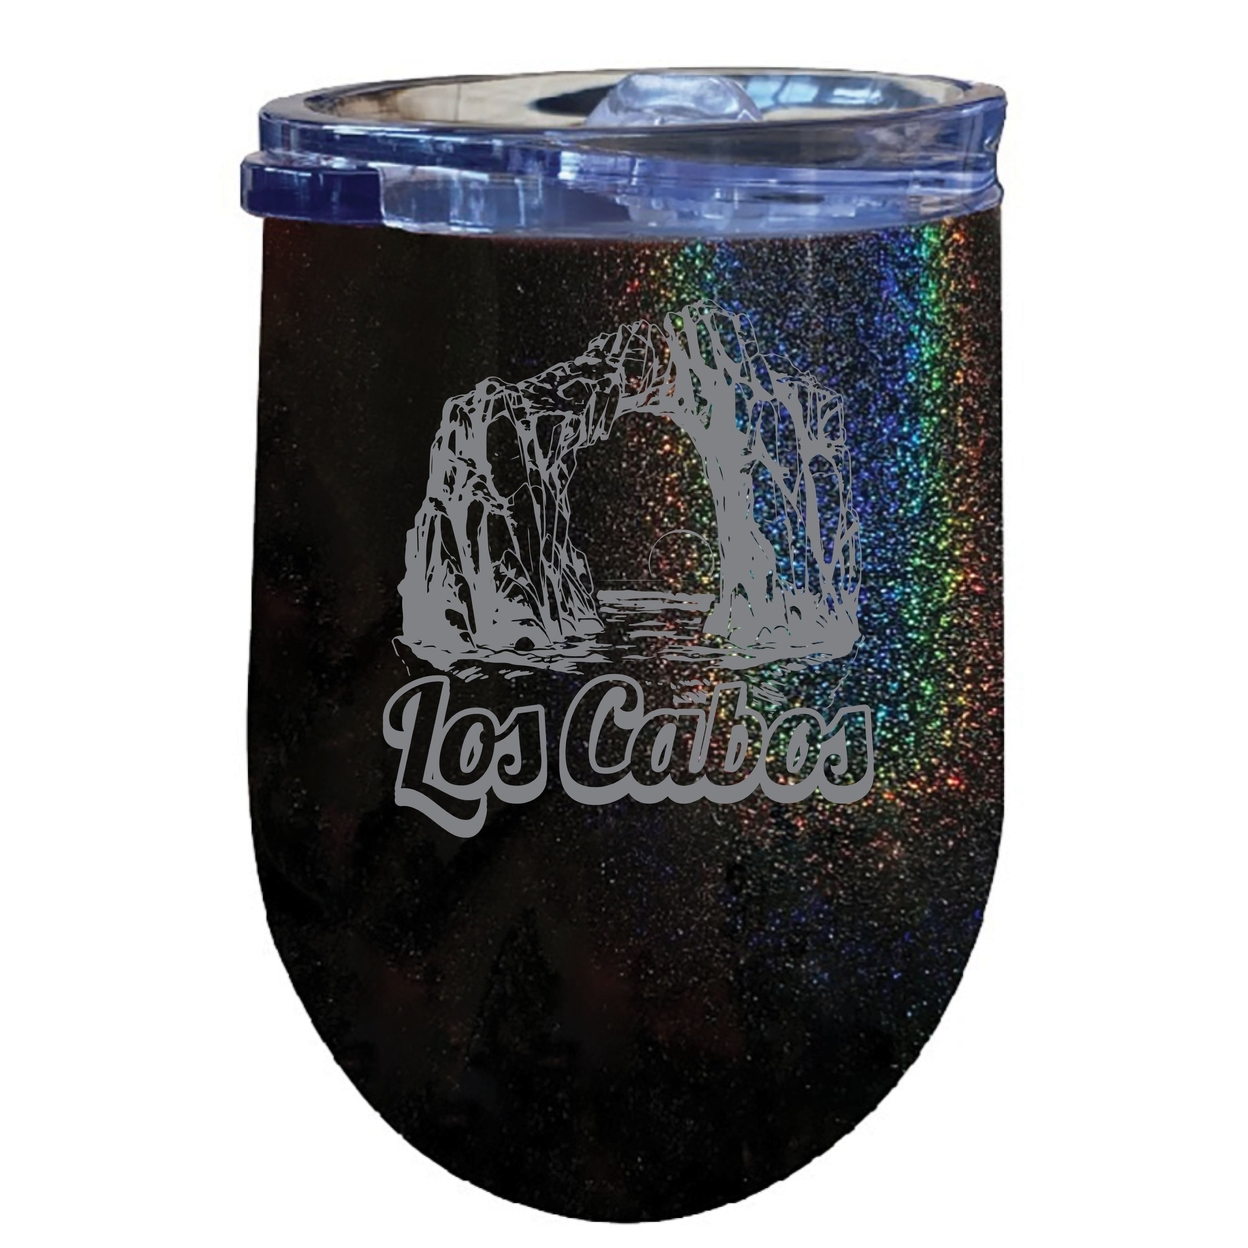 Los Cabos Mexico Souvenir 12 Oz Engraved Insulated Wine Stainless Steel Tumbler - Seafoam,,Single Unit